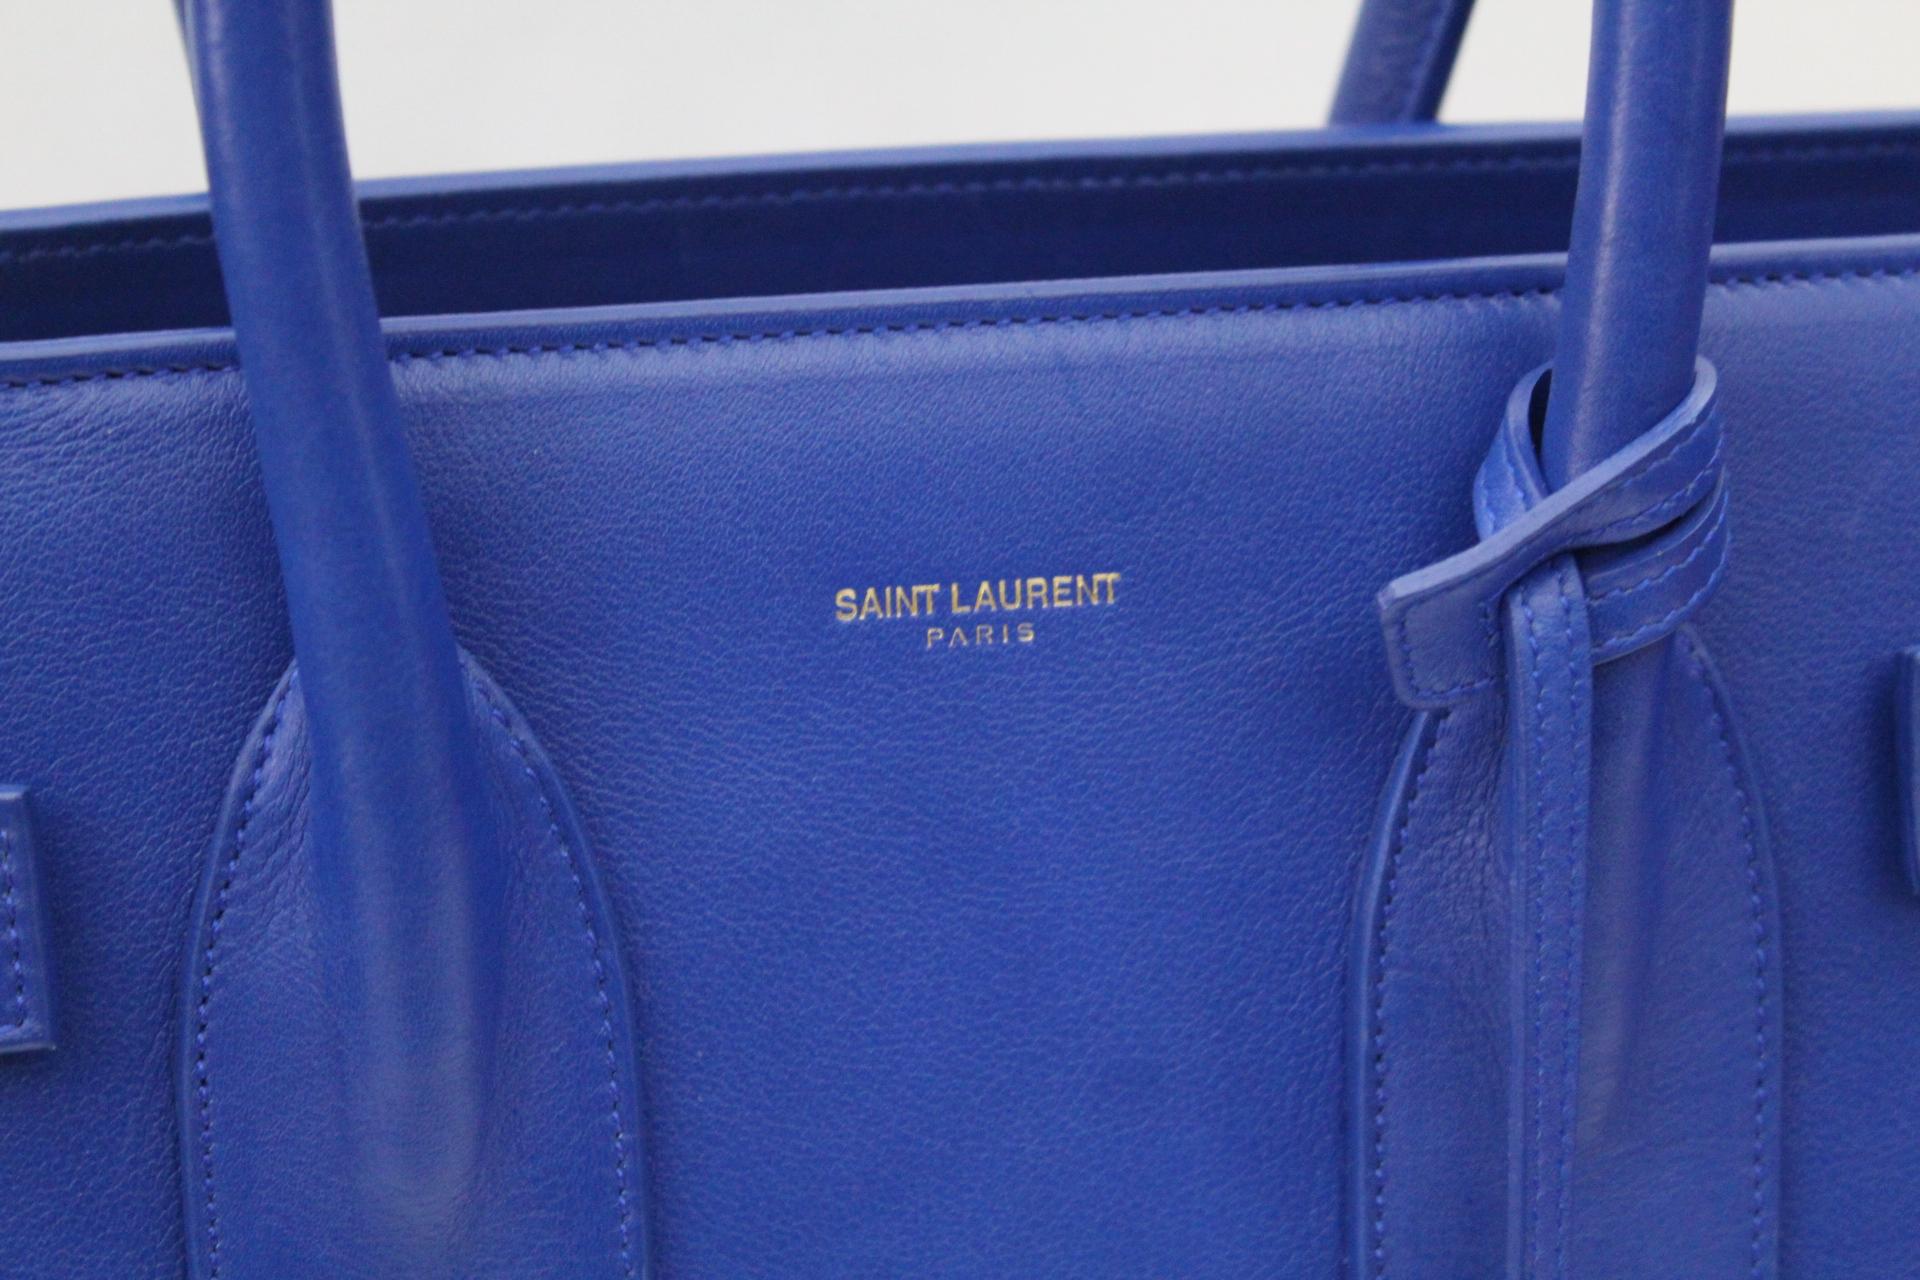 
Beautiful Yves Saint Laurent bag, Sac de Jour model. It is made of smooth leather in a particular color like electric blue. The bag is equipped with a long strap that allows you to wear the shoulder bag or shoulder bag. The conditions are excellent